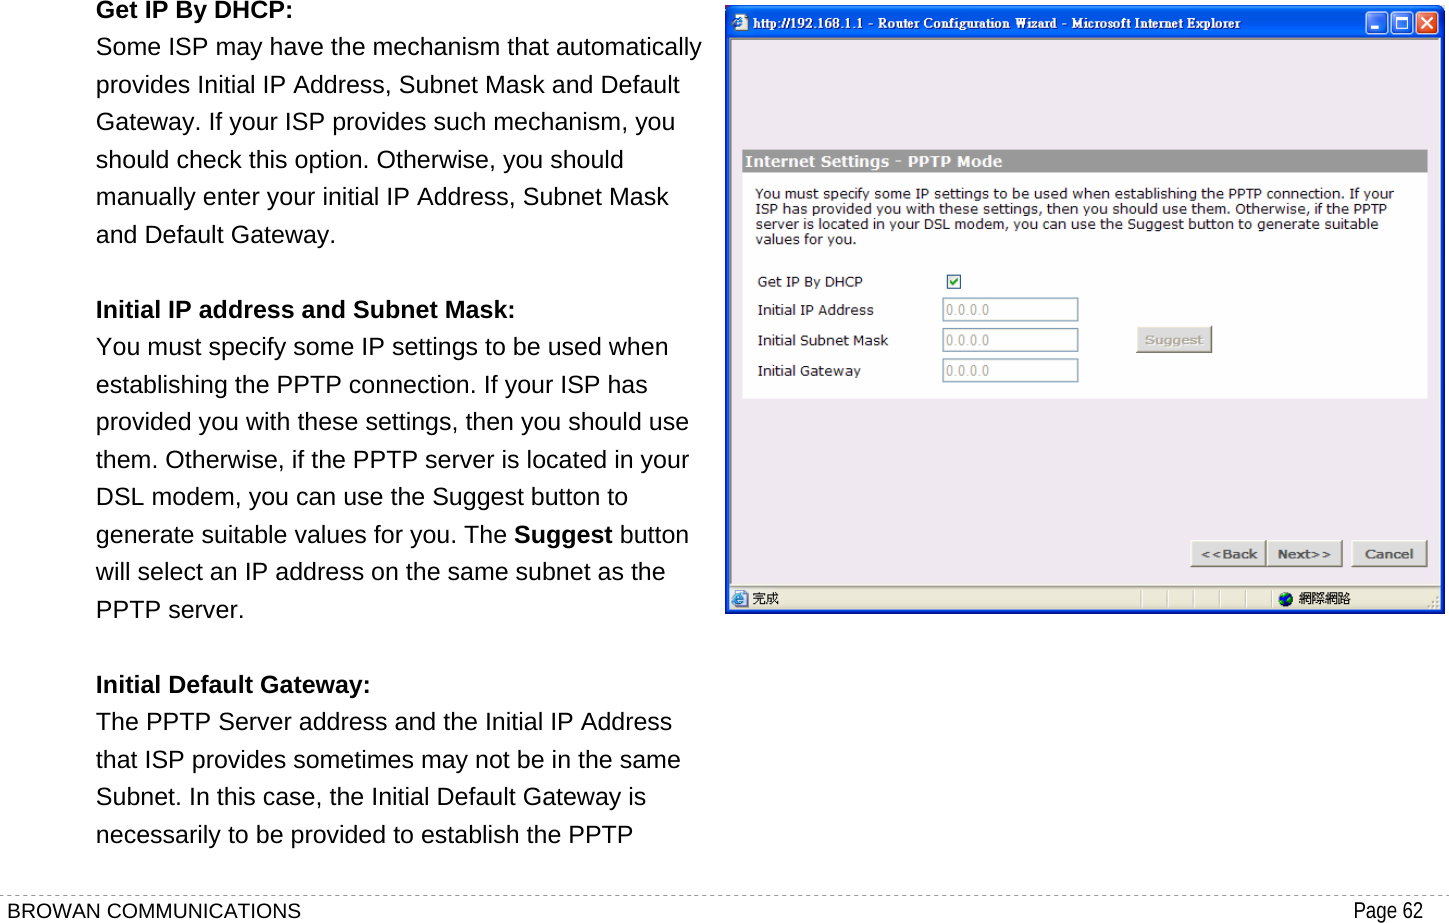 BROWAN COMMUNICATIONS                                                                                           Page 62  Get IP By DHCP: Some ISP may have the mechanism that automatically provides Initial IP Address, Subnet Mask and Default Gateway. If your ISP provides such mechanism, you should check this option. Otherwise, you should manually enter your initial IP Address, Subnet Mask and Default Gateway.  Initial IP address and Subnet Mask: You must specify some IP settings to be used when establishing the PPTP connection. If your ISP has provided you with these settings, then you should use them. Otherwise, if the PPTP server is located in your DSL modem, you can use the Suggest button to generate suitable values for you. The Suggest button will select an IP address on the same subnet as the PPTP server.  Initial Default Gateway: The PPTP Server address and the Initial IP Address that ISP provides sometimes may not be in the same Subnet. In this case, the Initial Default Gateway is necessarily to be provided to establish the PPTP  